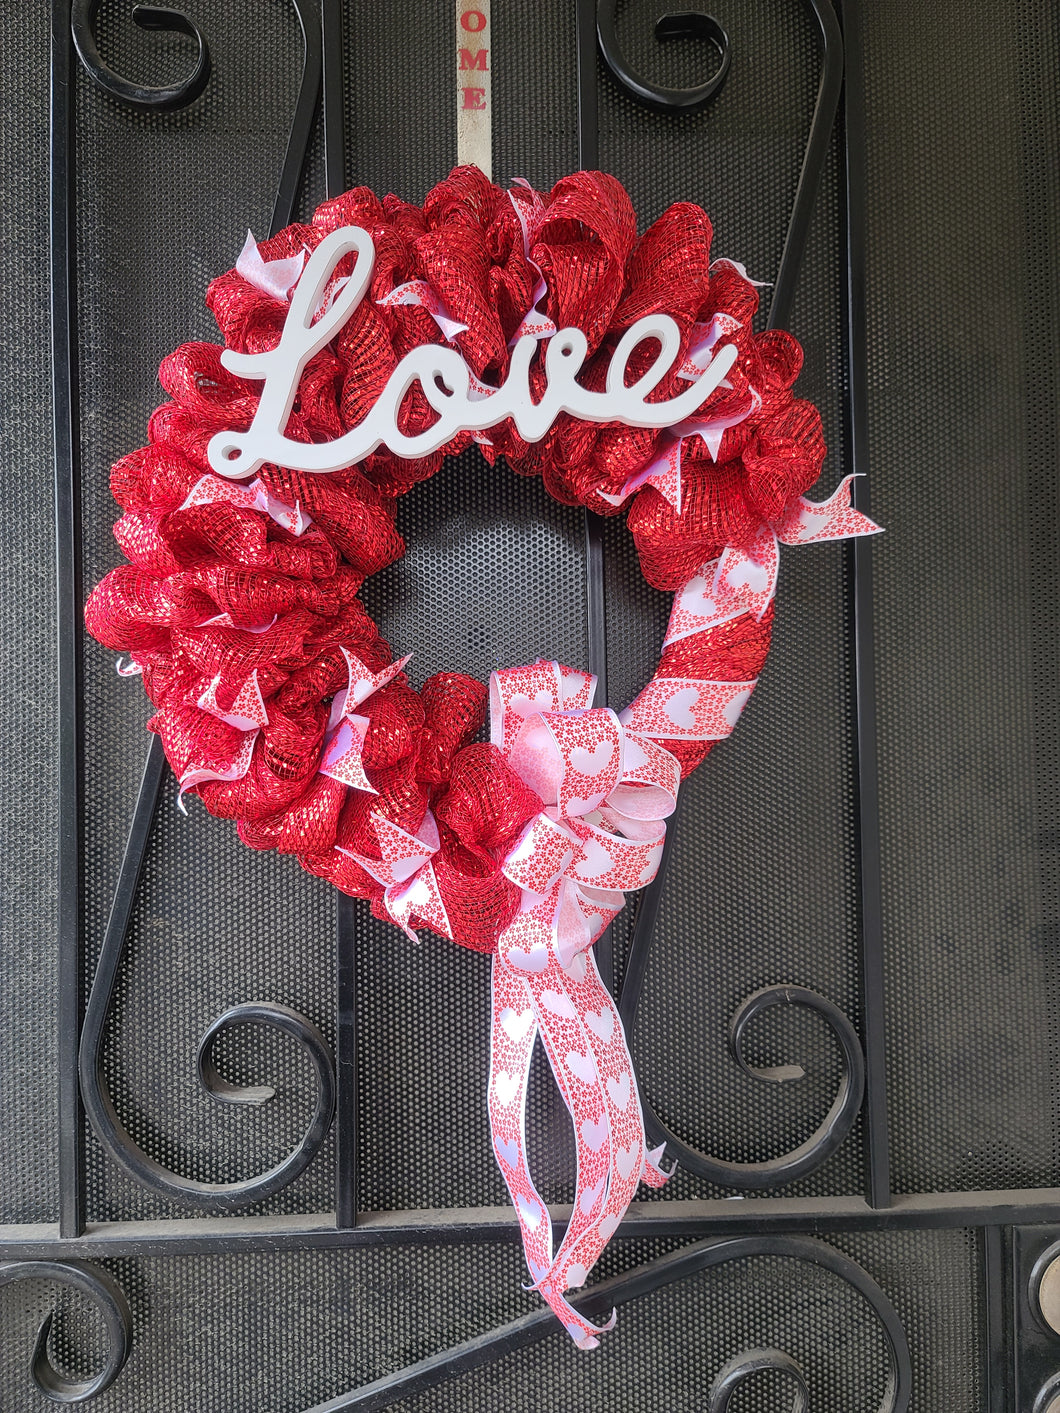 The Valentine's Collection - Wall Hanging Art and Wreaths